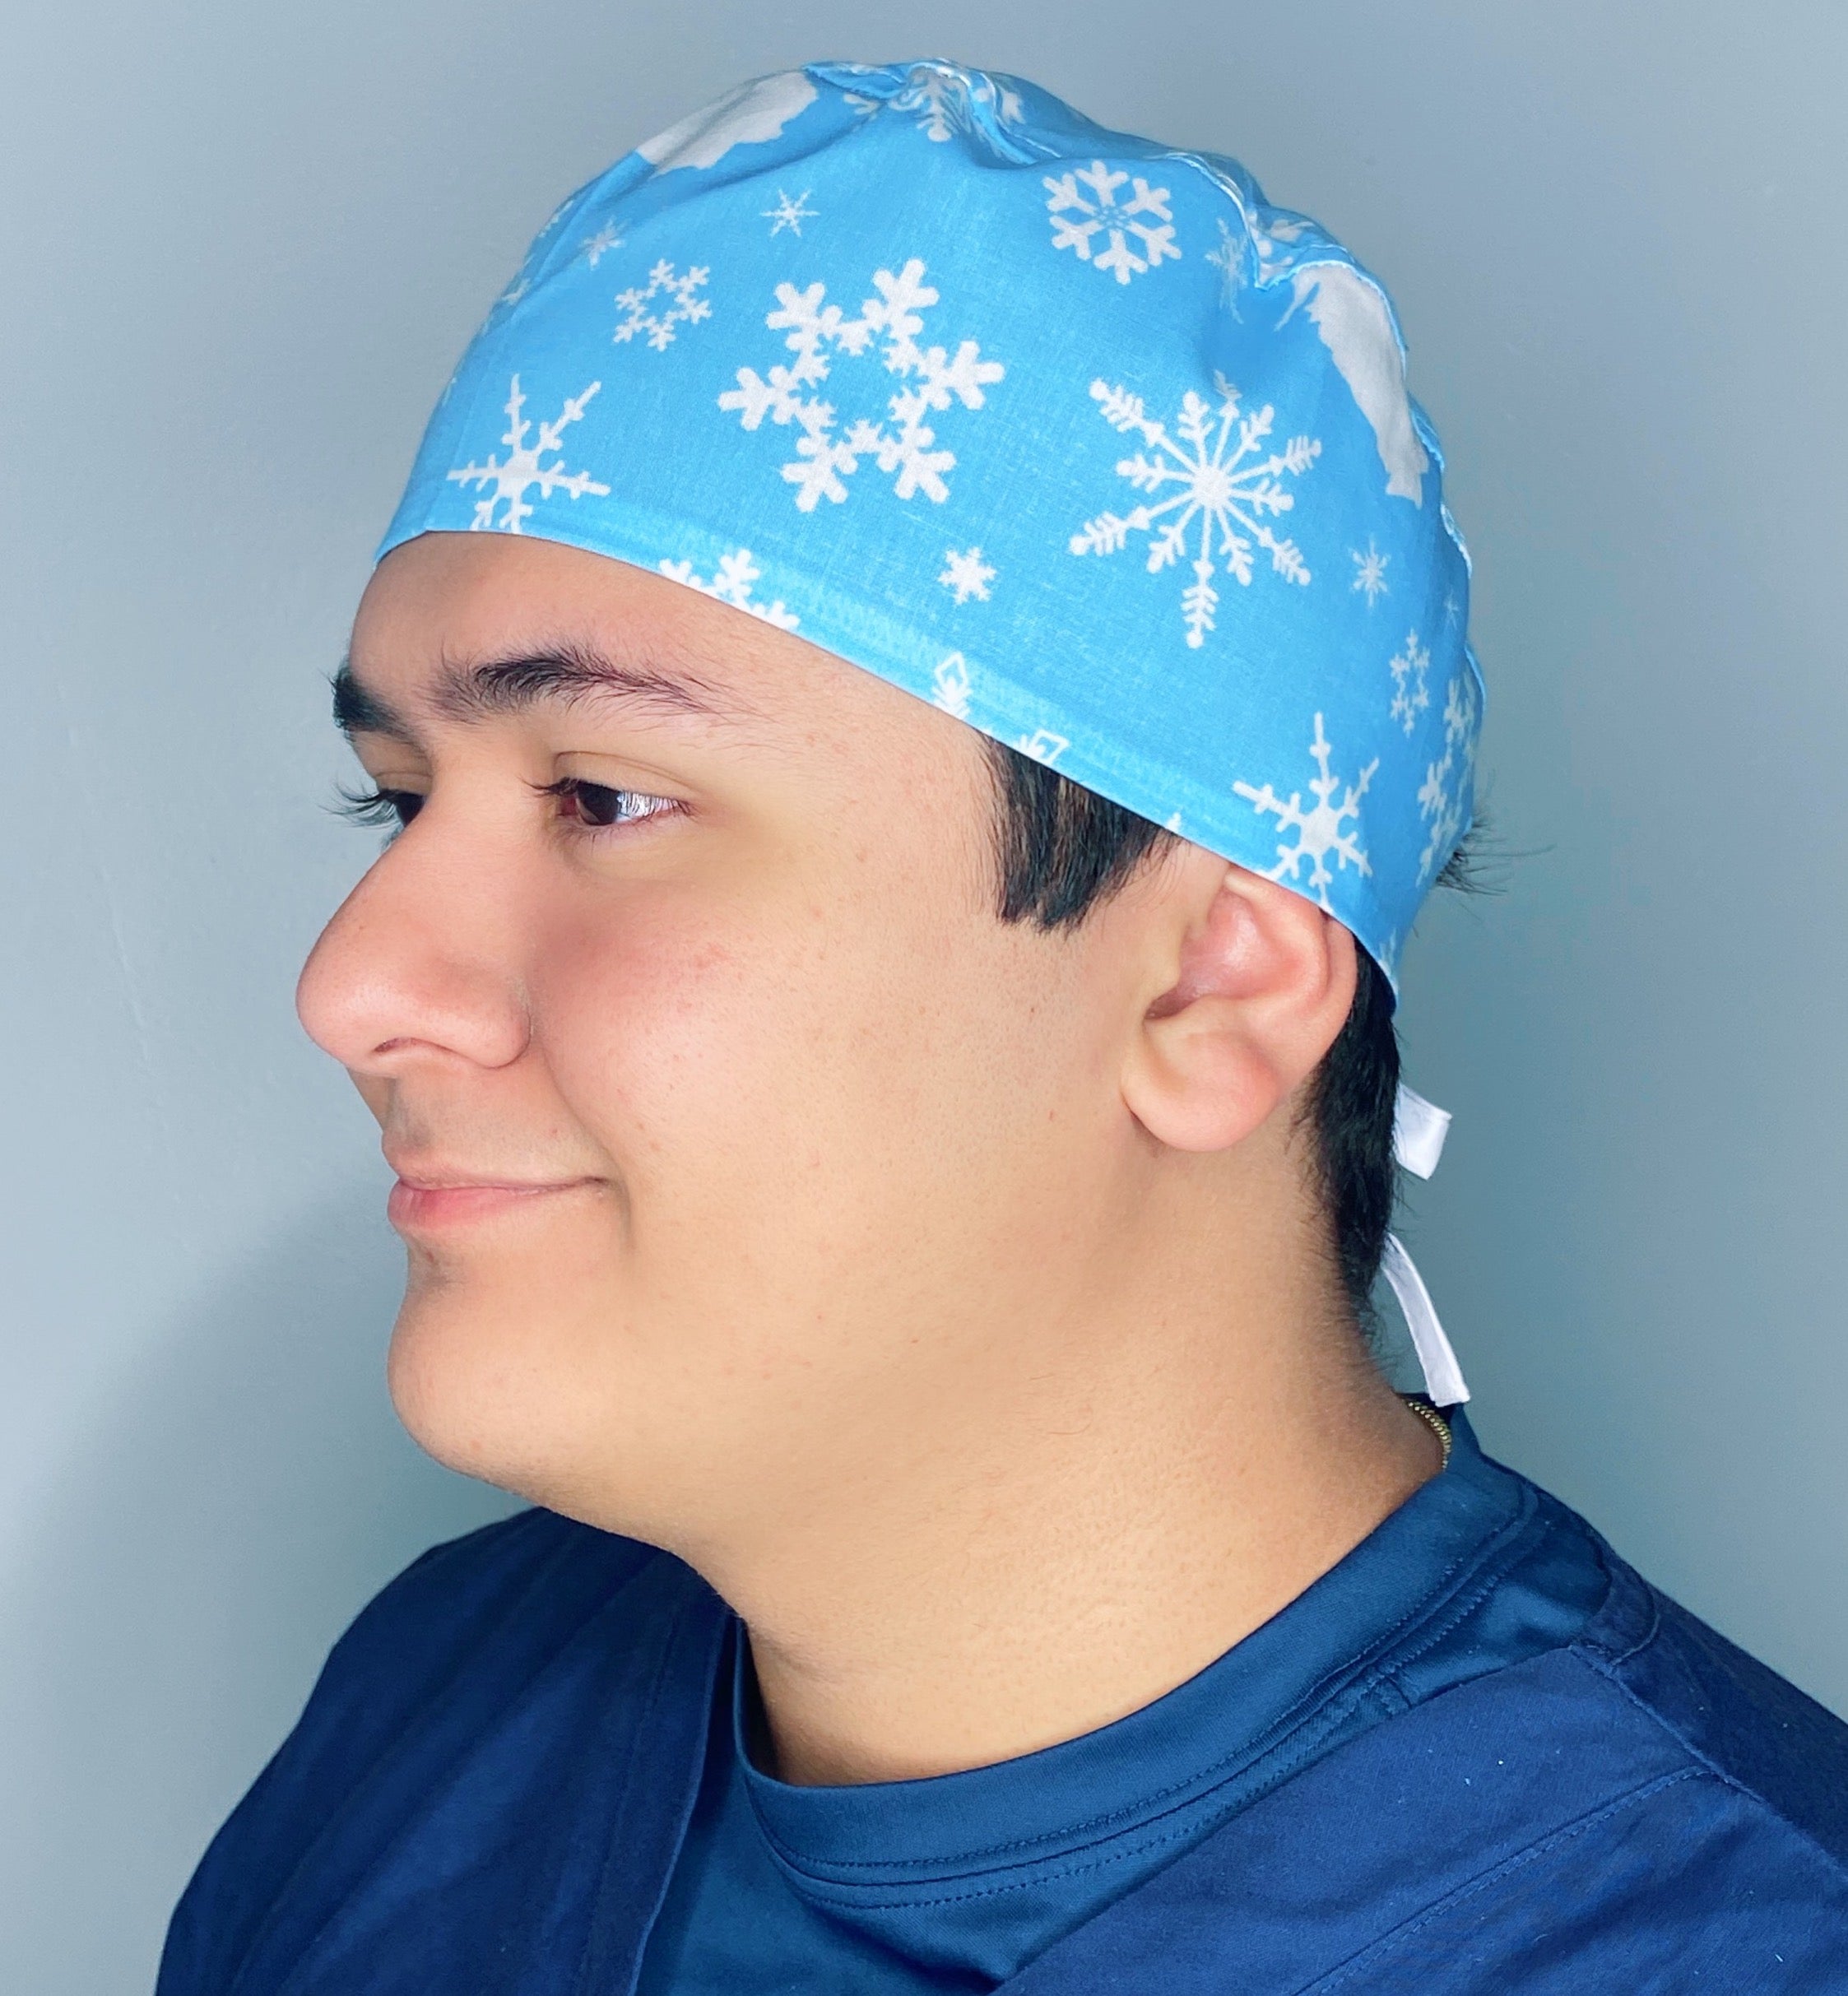 The State of Michigan & Snowflakes Christmas/Winter themed Unisex Holiday Scrub Cap